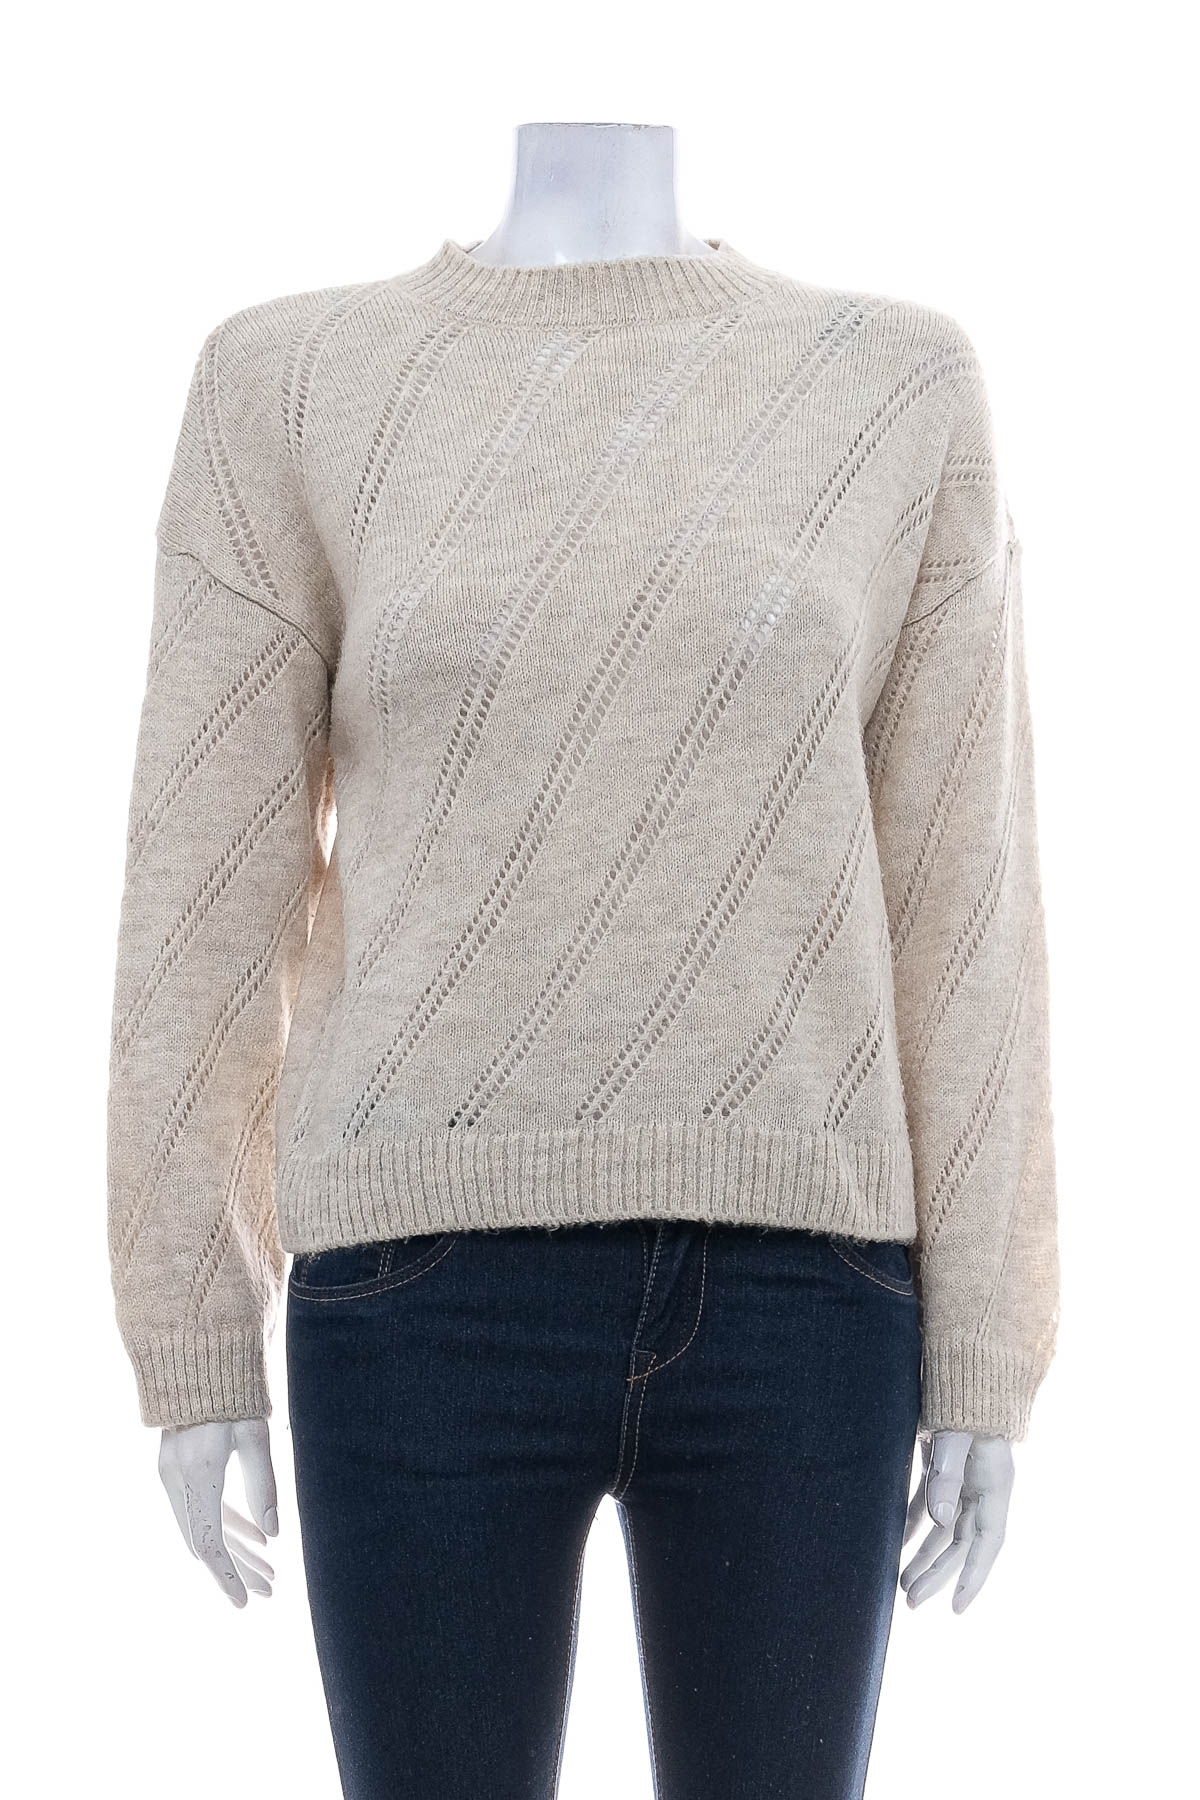 Women's sweater - MNG Casual - 0